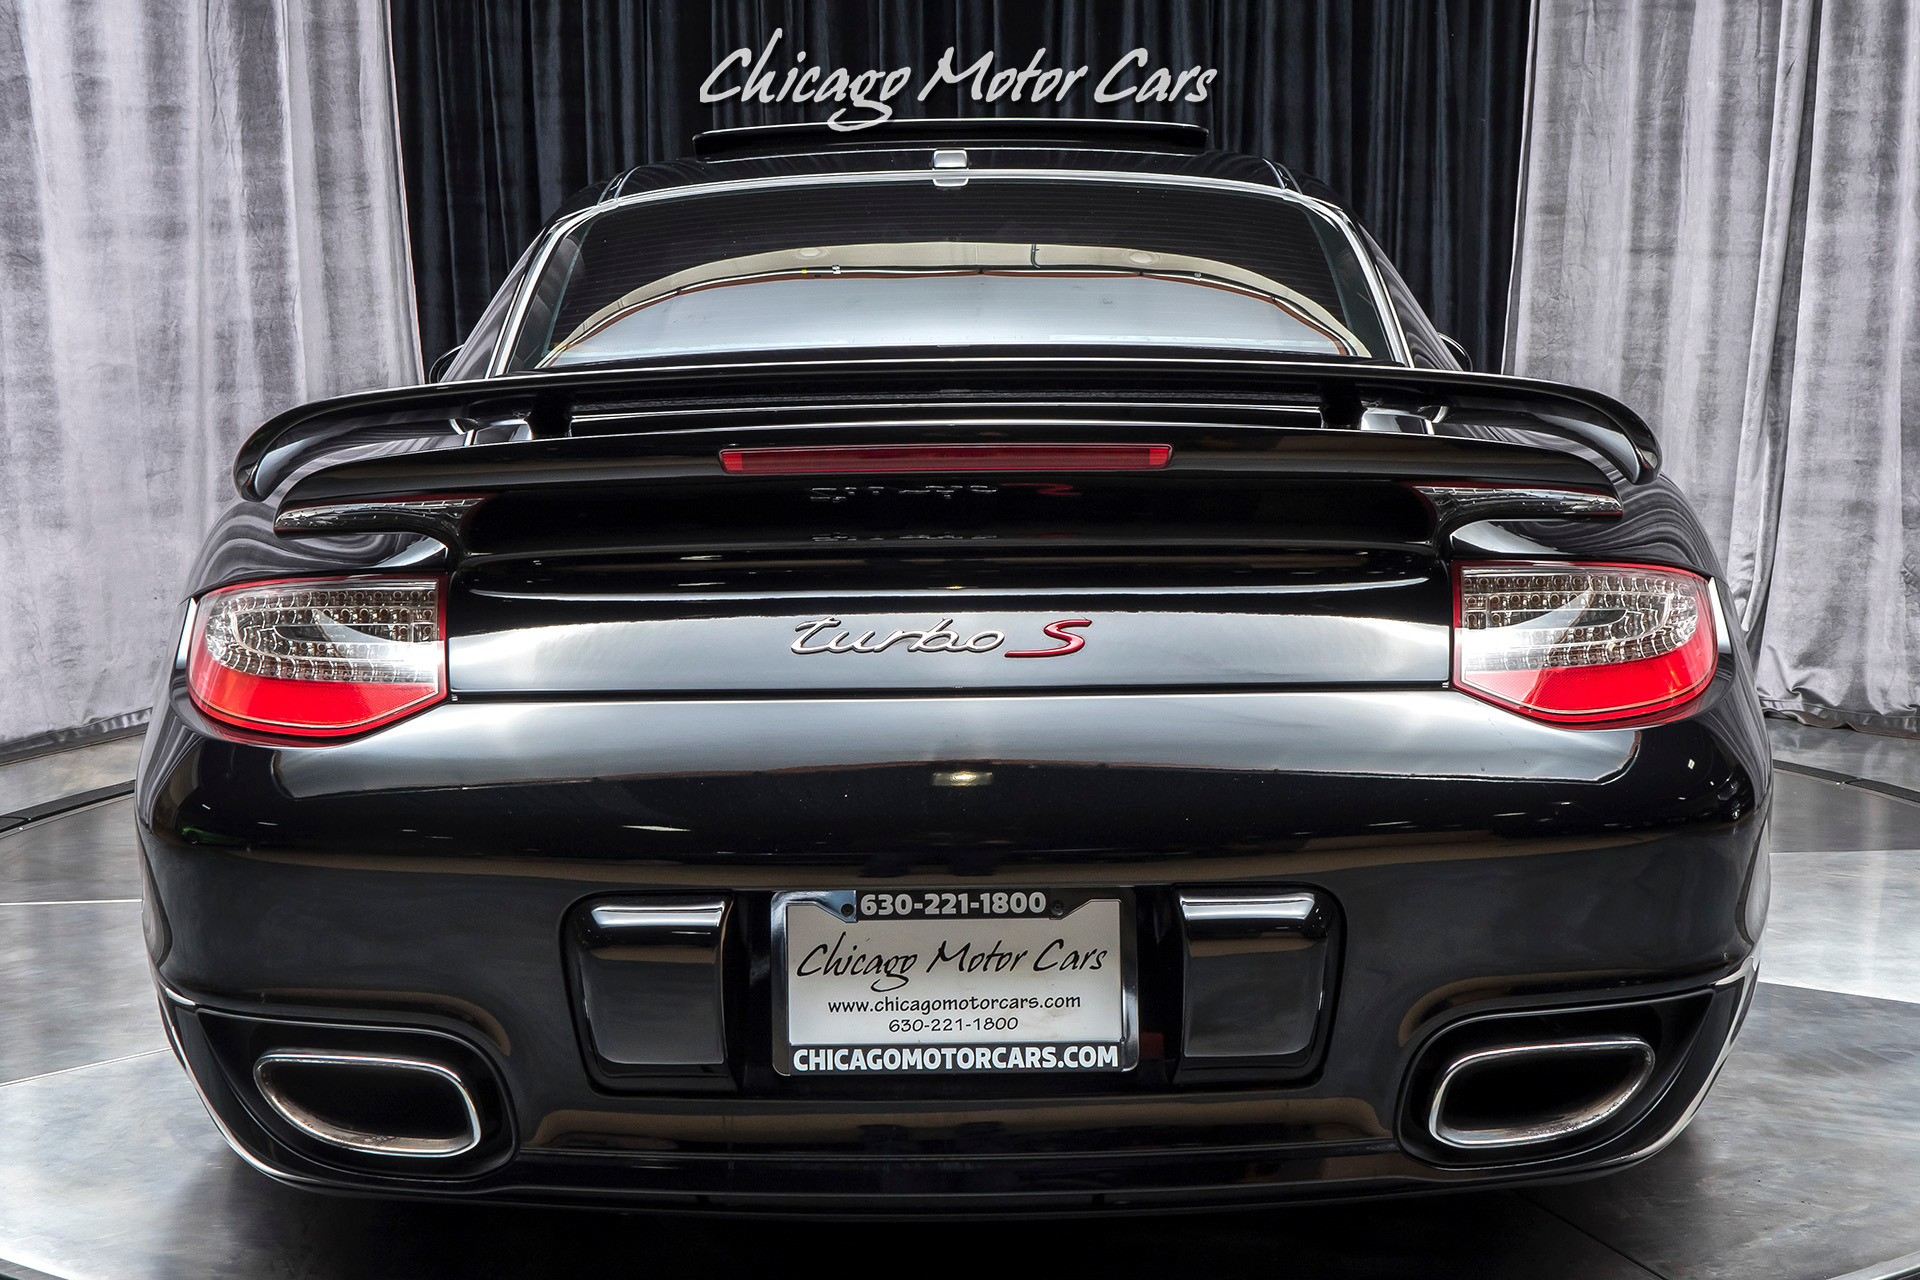 Used-2011-Porsche-911-Turbo-S-Coupe-MSRP-173K-CARBON-LOADED-PDK-HEATED-STEERING-WHEEL